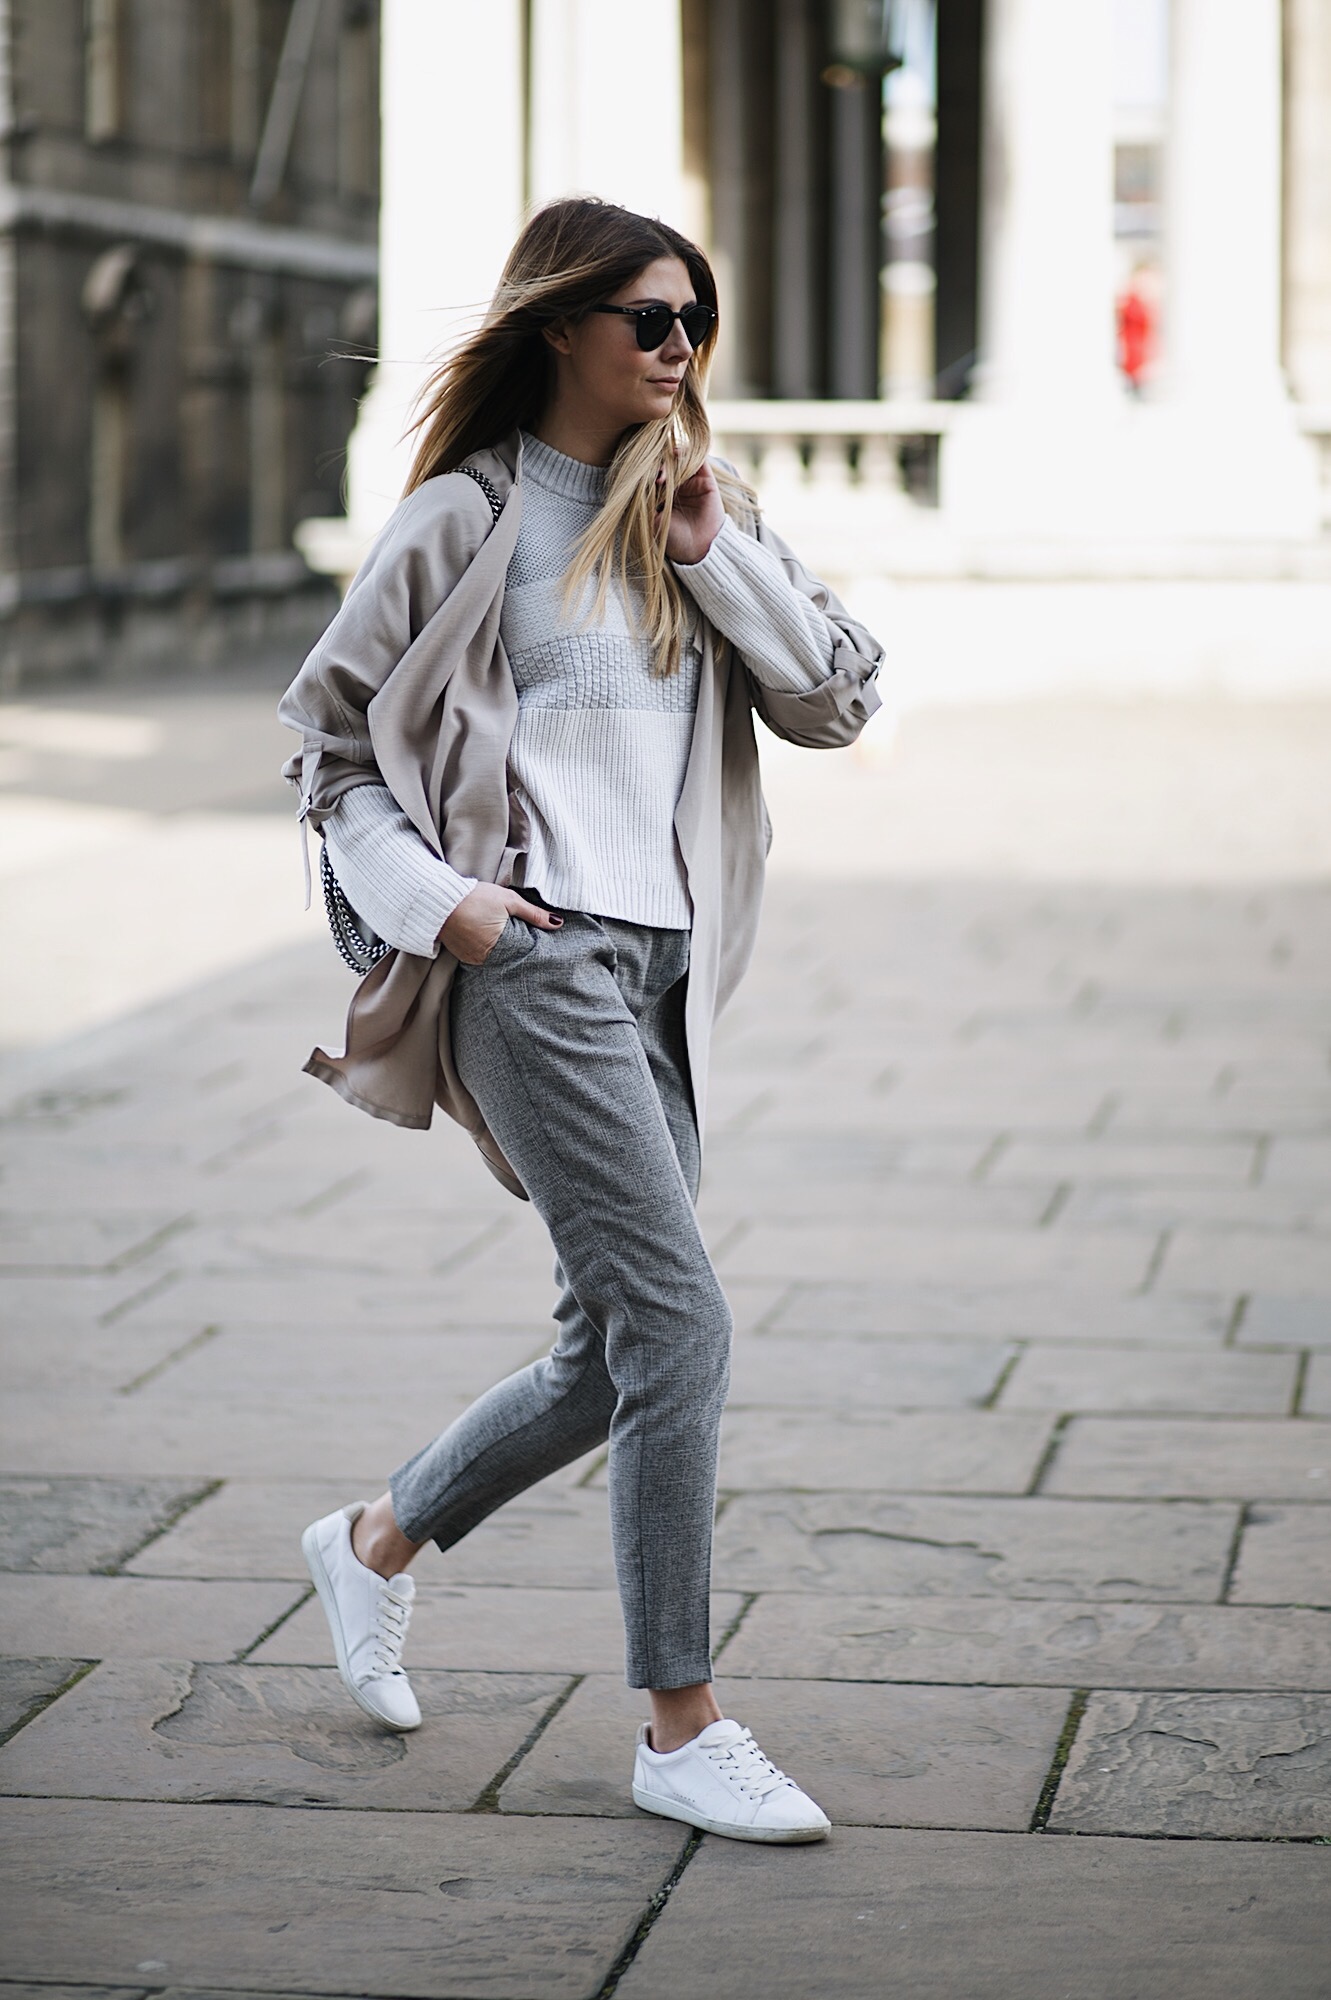 beige jacket, grey & white stripe jumper, grey tailored peg leg trousers, white trainers lace ups, grey Stella McCartney Falabella, casual winter outfit